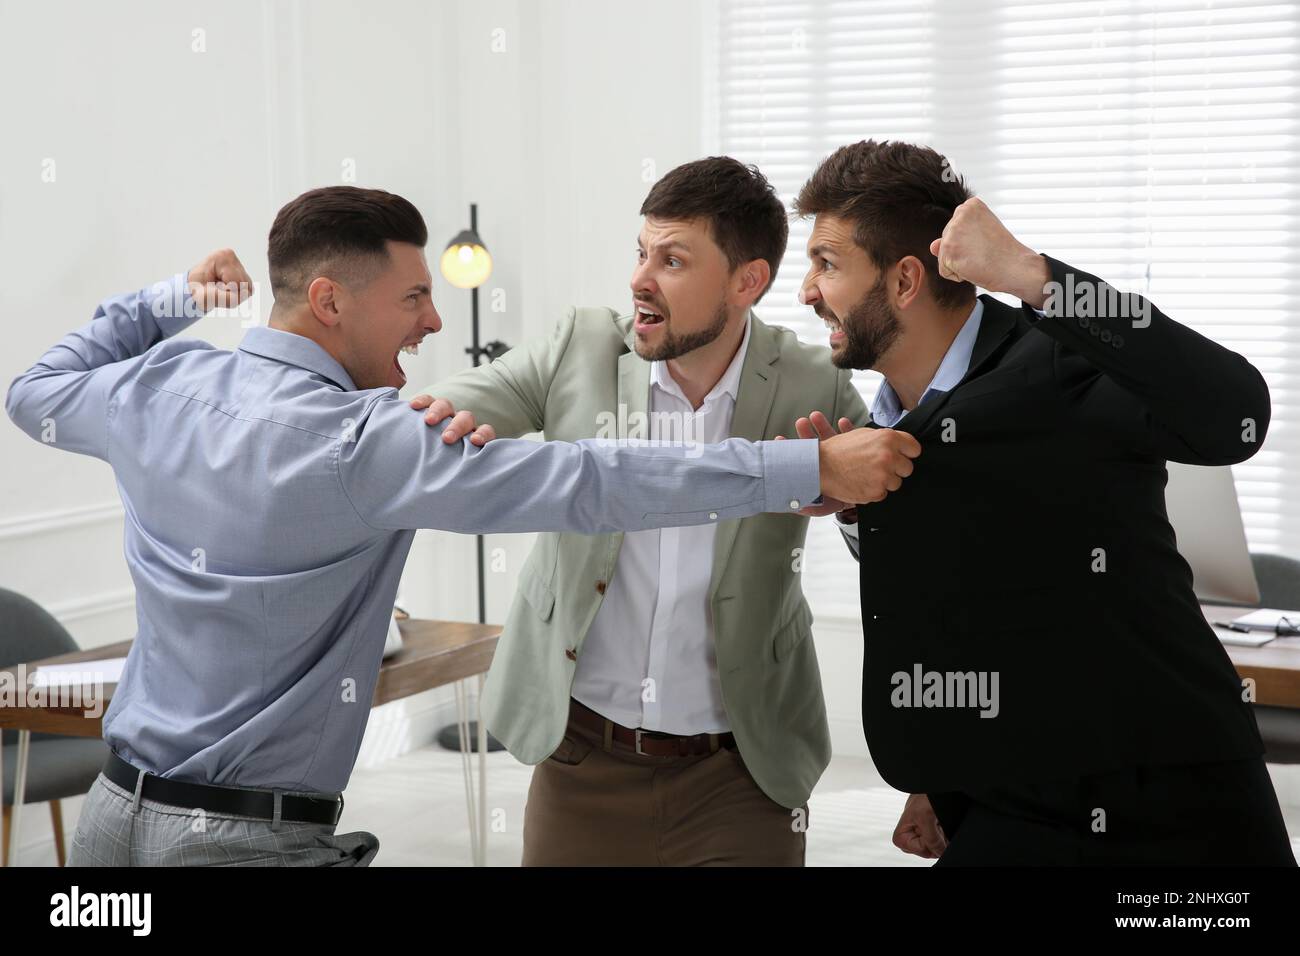 Man interrupting colleagues fight at work in office Stock Photo